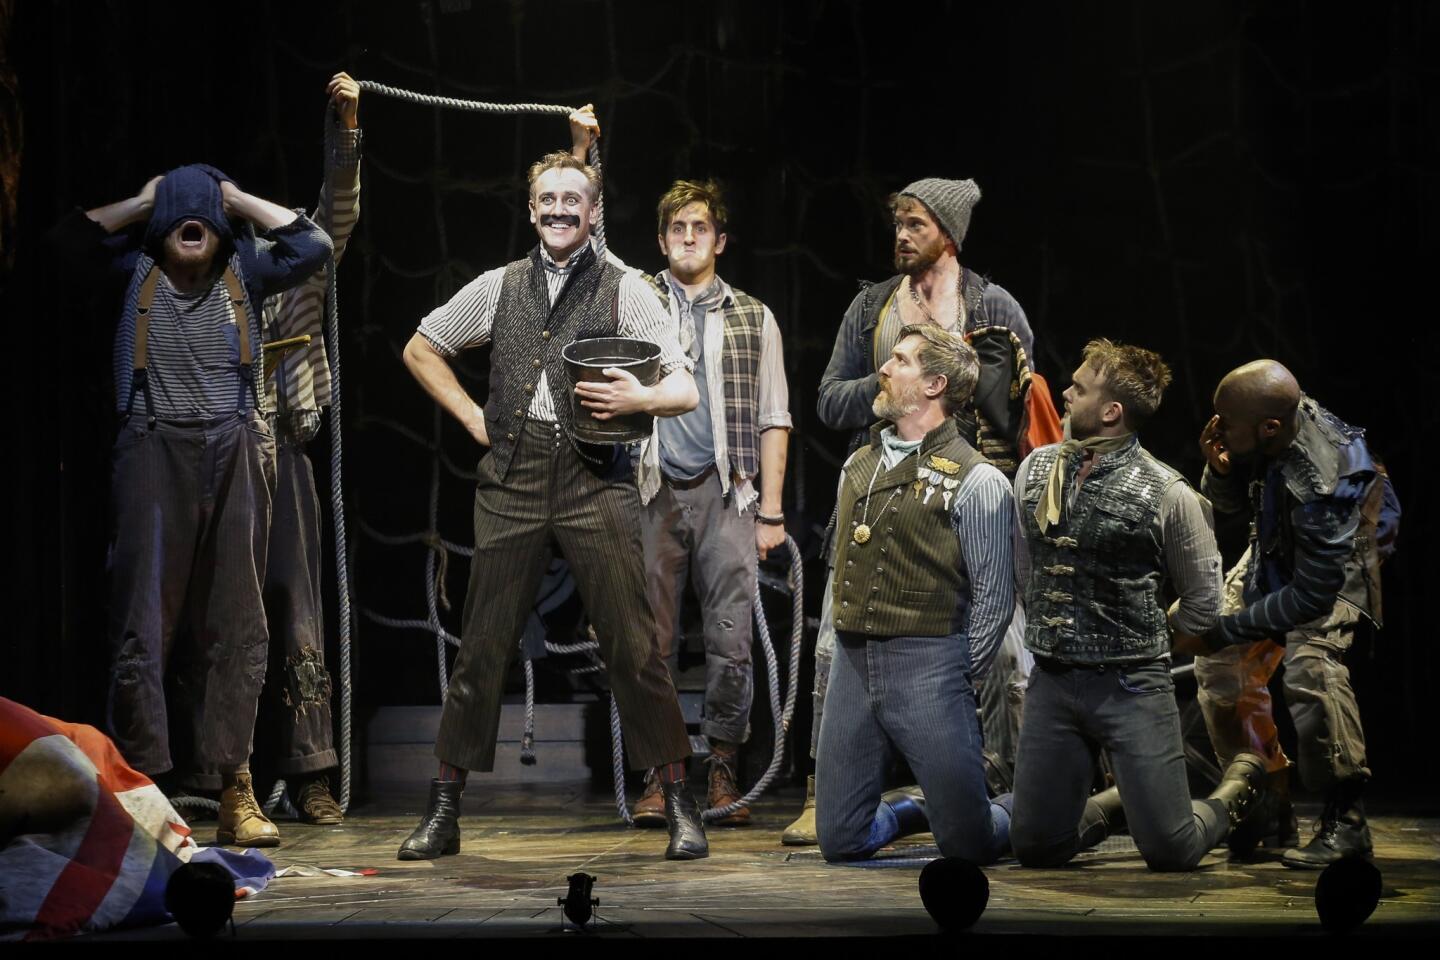 Arts and culture in pictures by The Times | 'Peter and the Starcatcher'